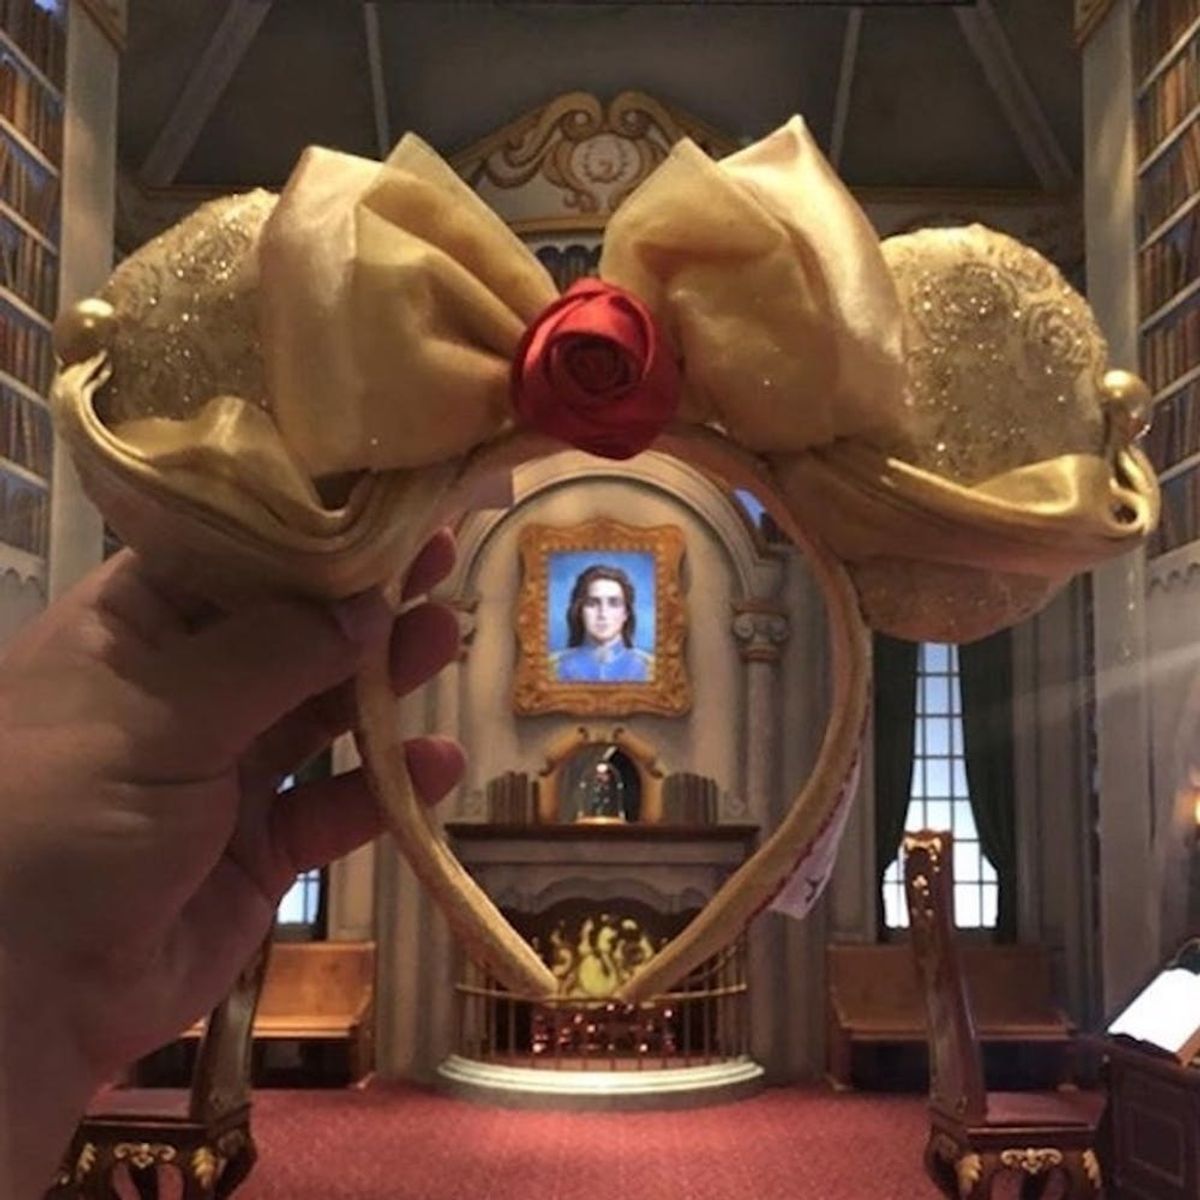 Disney Just Released “Beauty and the Beast” Minnie Mouse Ears… and We Know Where to Find Them